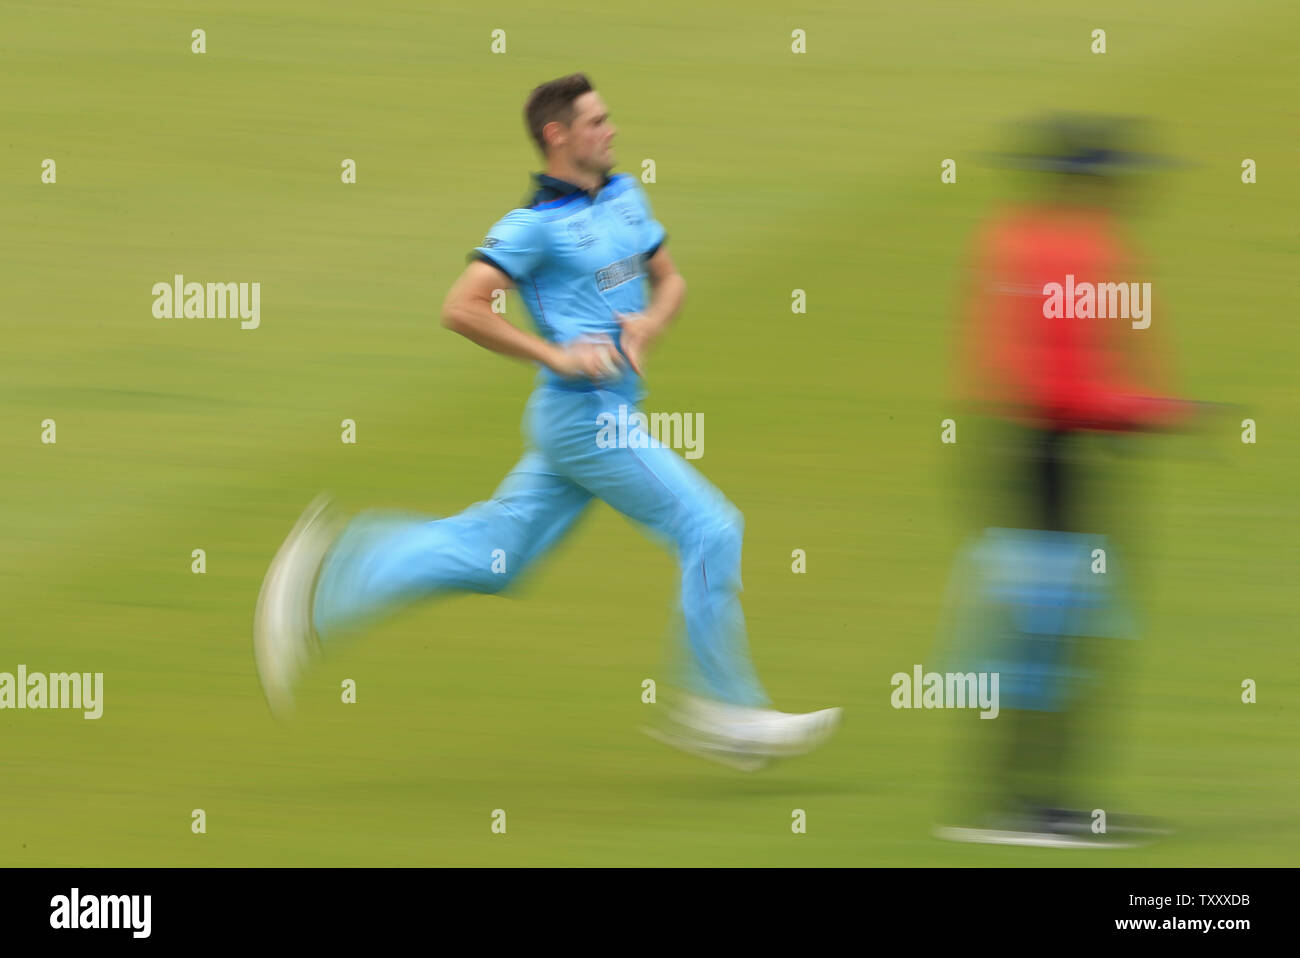 London, UK. 25th June, 2019. A slow shutter speed shot of Chris Woakes of England running in to bowl during the England v Australia, ICC Cricket World Cup match, at Lords, London, England. Credit: Cal Sport Media/Alamy Live News Stock Photo